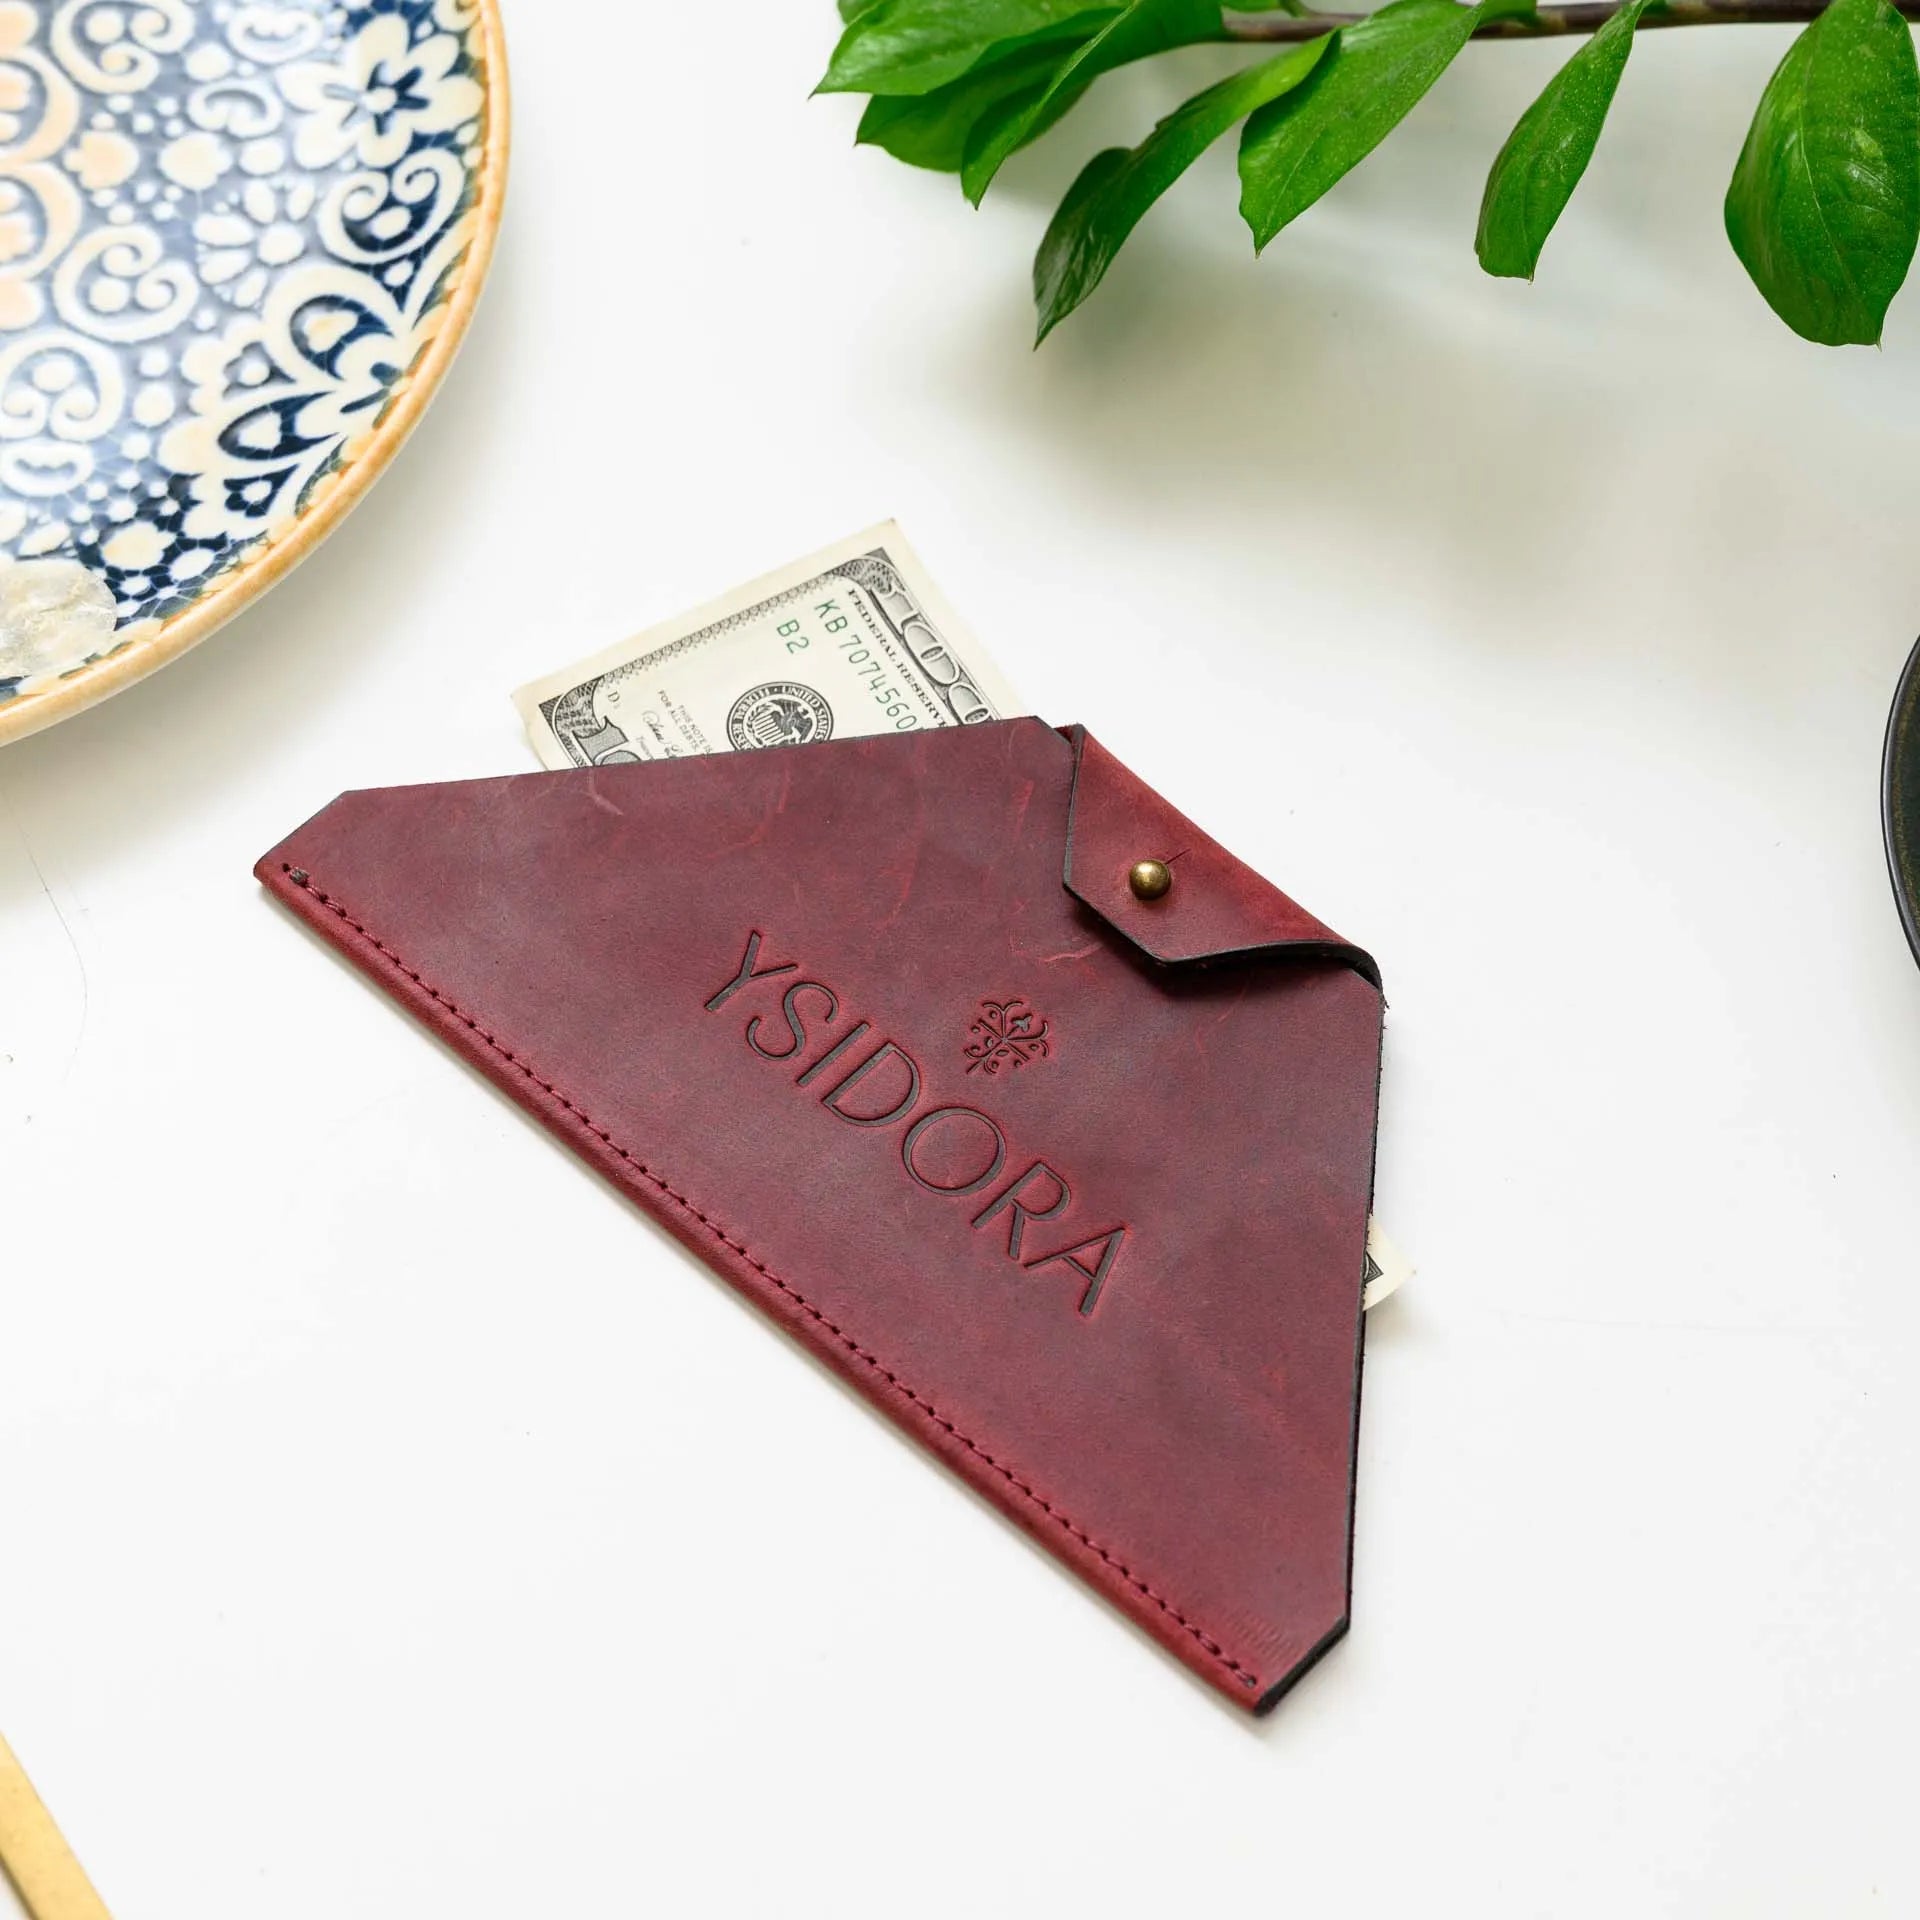 Check Holder For Restaurant: Ensure a professional and polished check presentation with this elegant check holder.